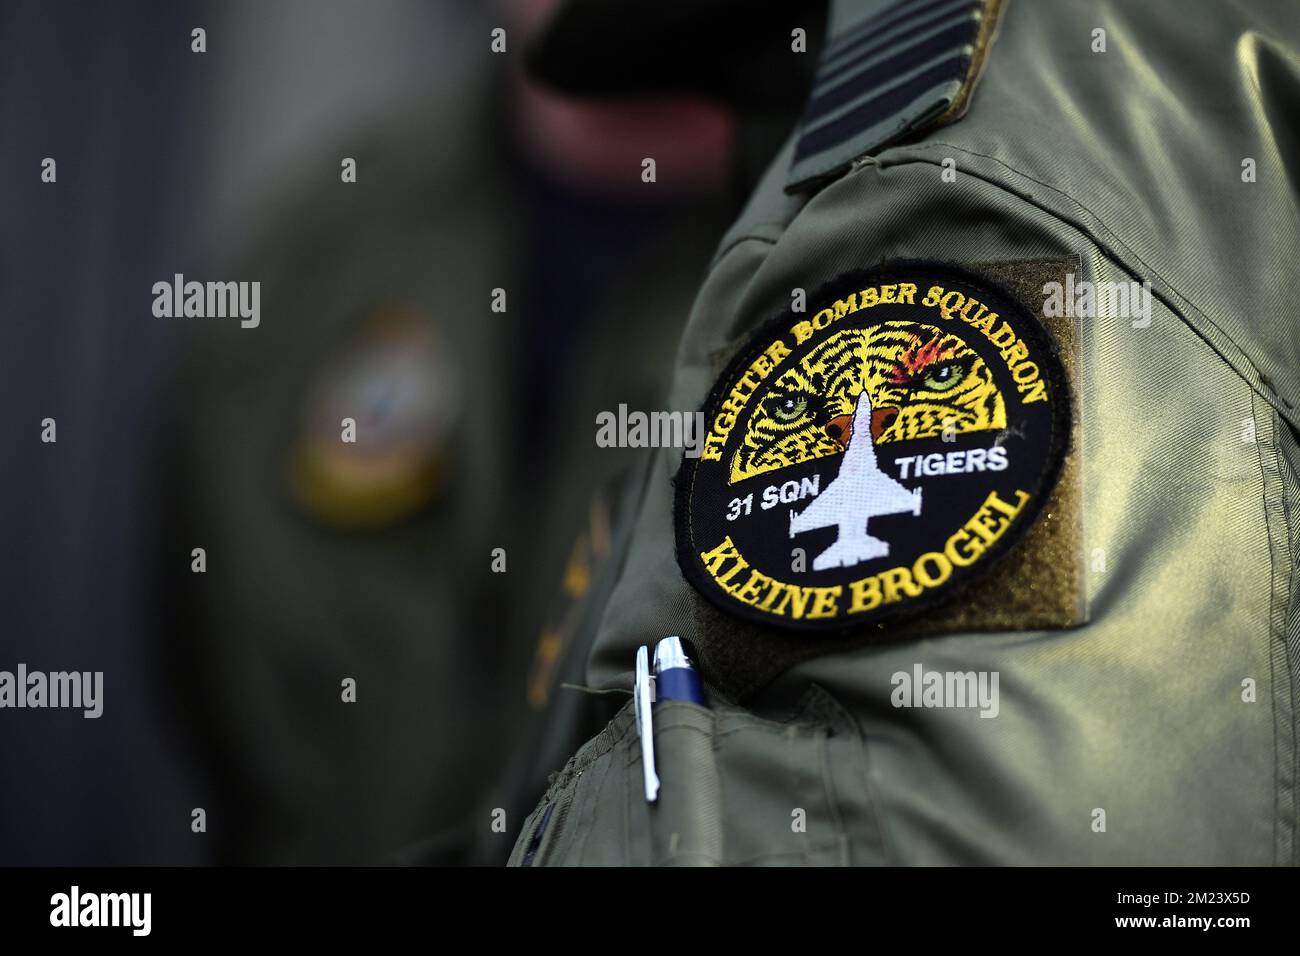 A logo patch of the '31 Sqn Tigers Fighter Bomber Squadron Kleine Brogel' pictured at a visit to the Louise-Marie Frigate, on Friday 16 December 2016, in Catania, Sicily, Italy. The Frigate is part of military operation 'Sophia', which aims to destabilize the business model of human traffickers on the Mediterranean Sea. BELGA PHOTO ERIC LALMAND Stock Photo